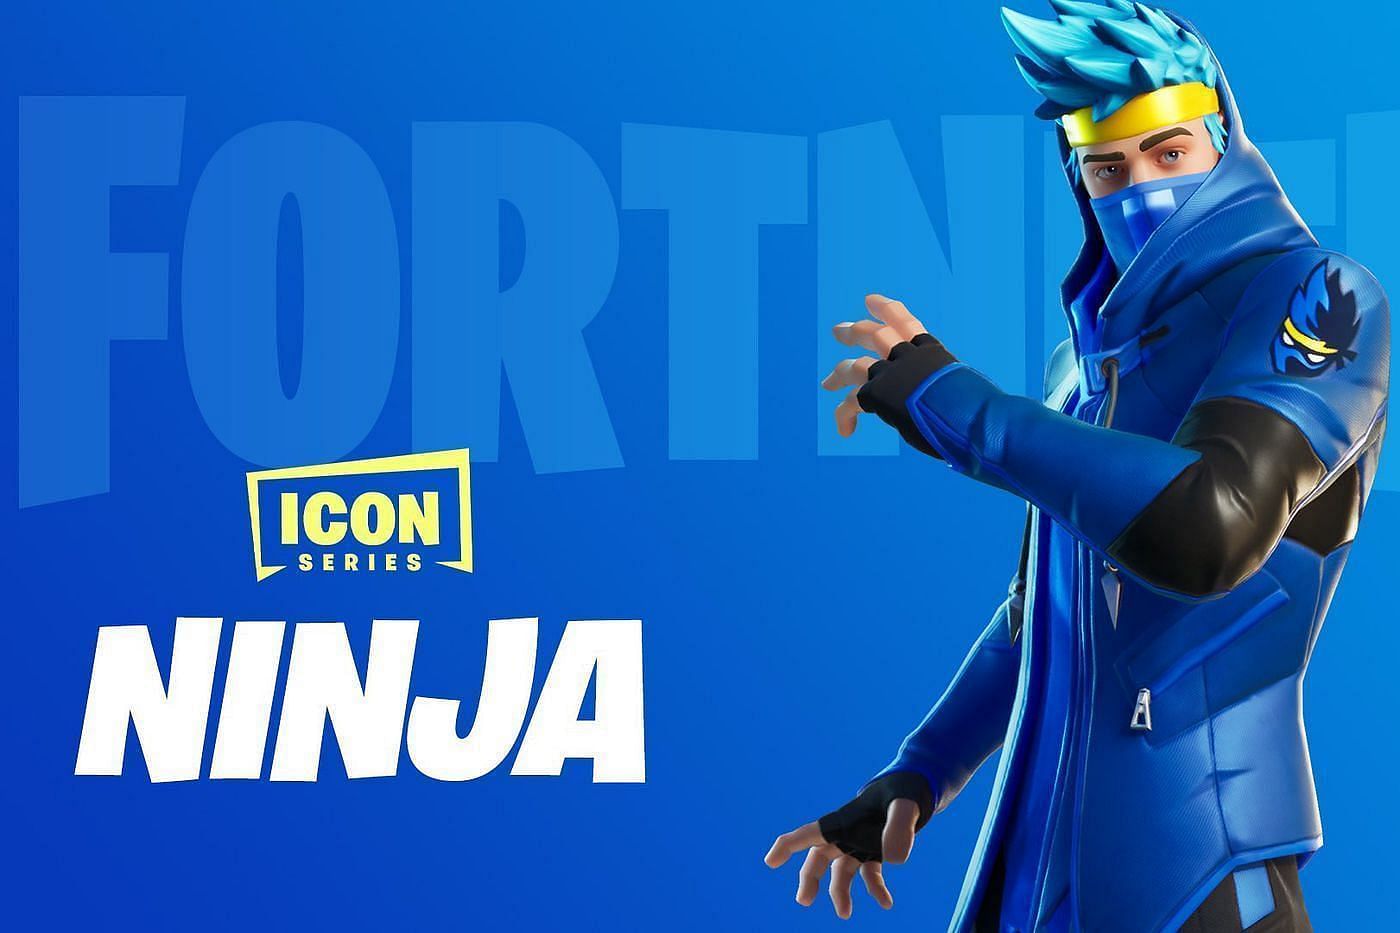 Fortnite icon Ninja claimed that he has no intentions of pulling big numbers on Twitch again. (Image via Fortnite)